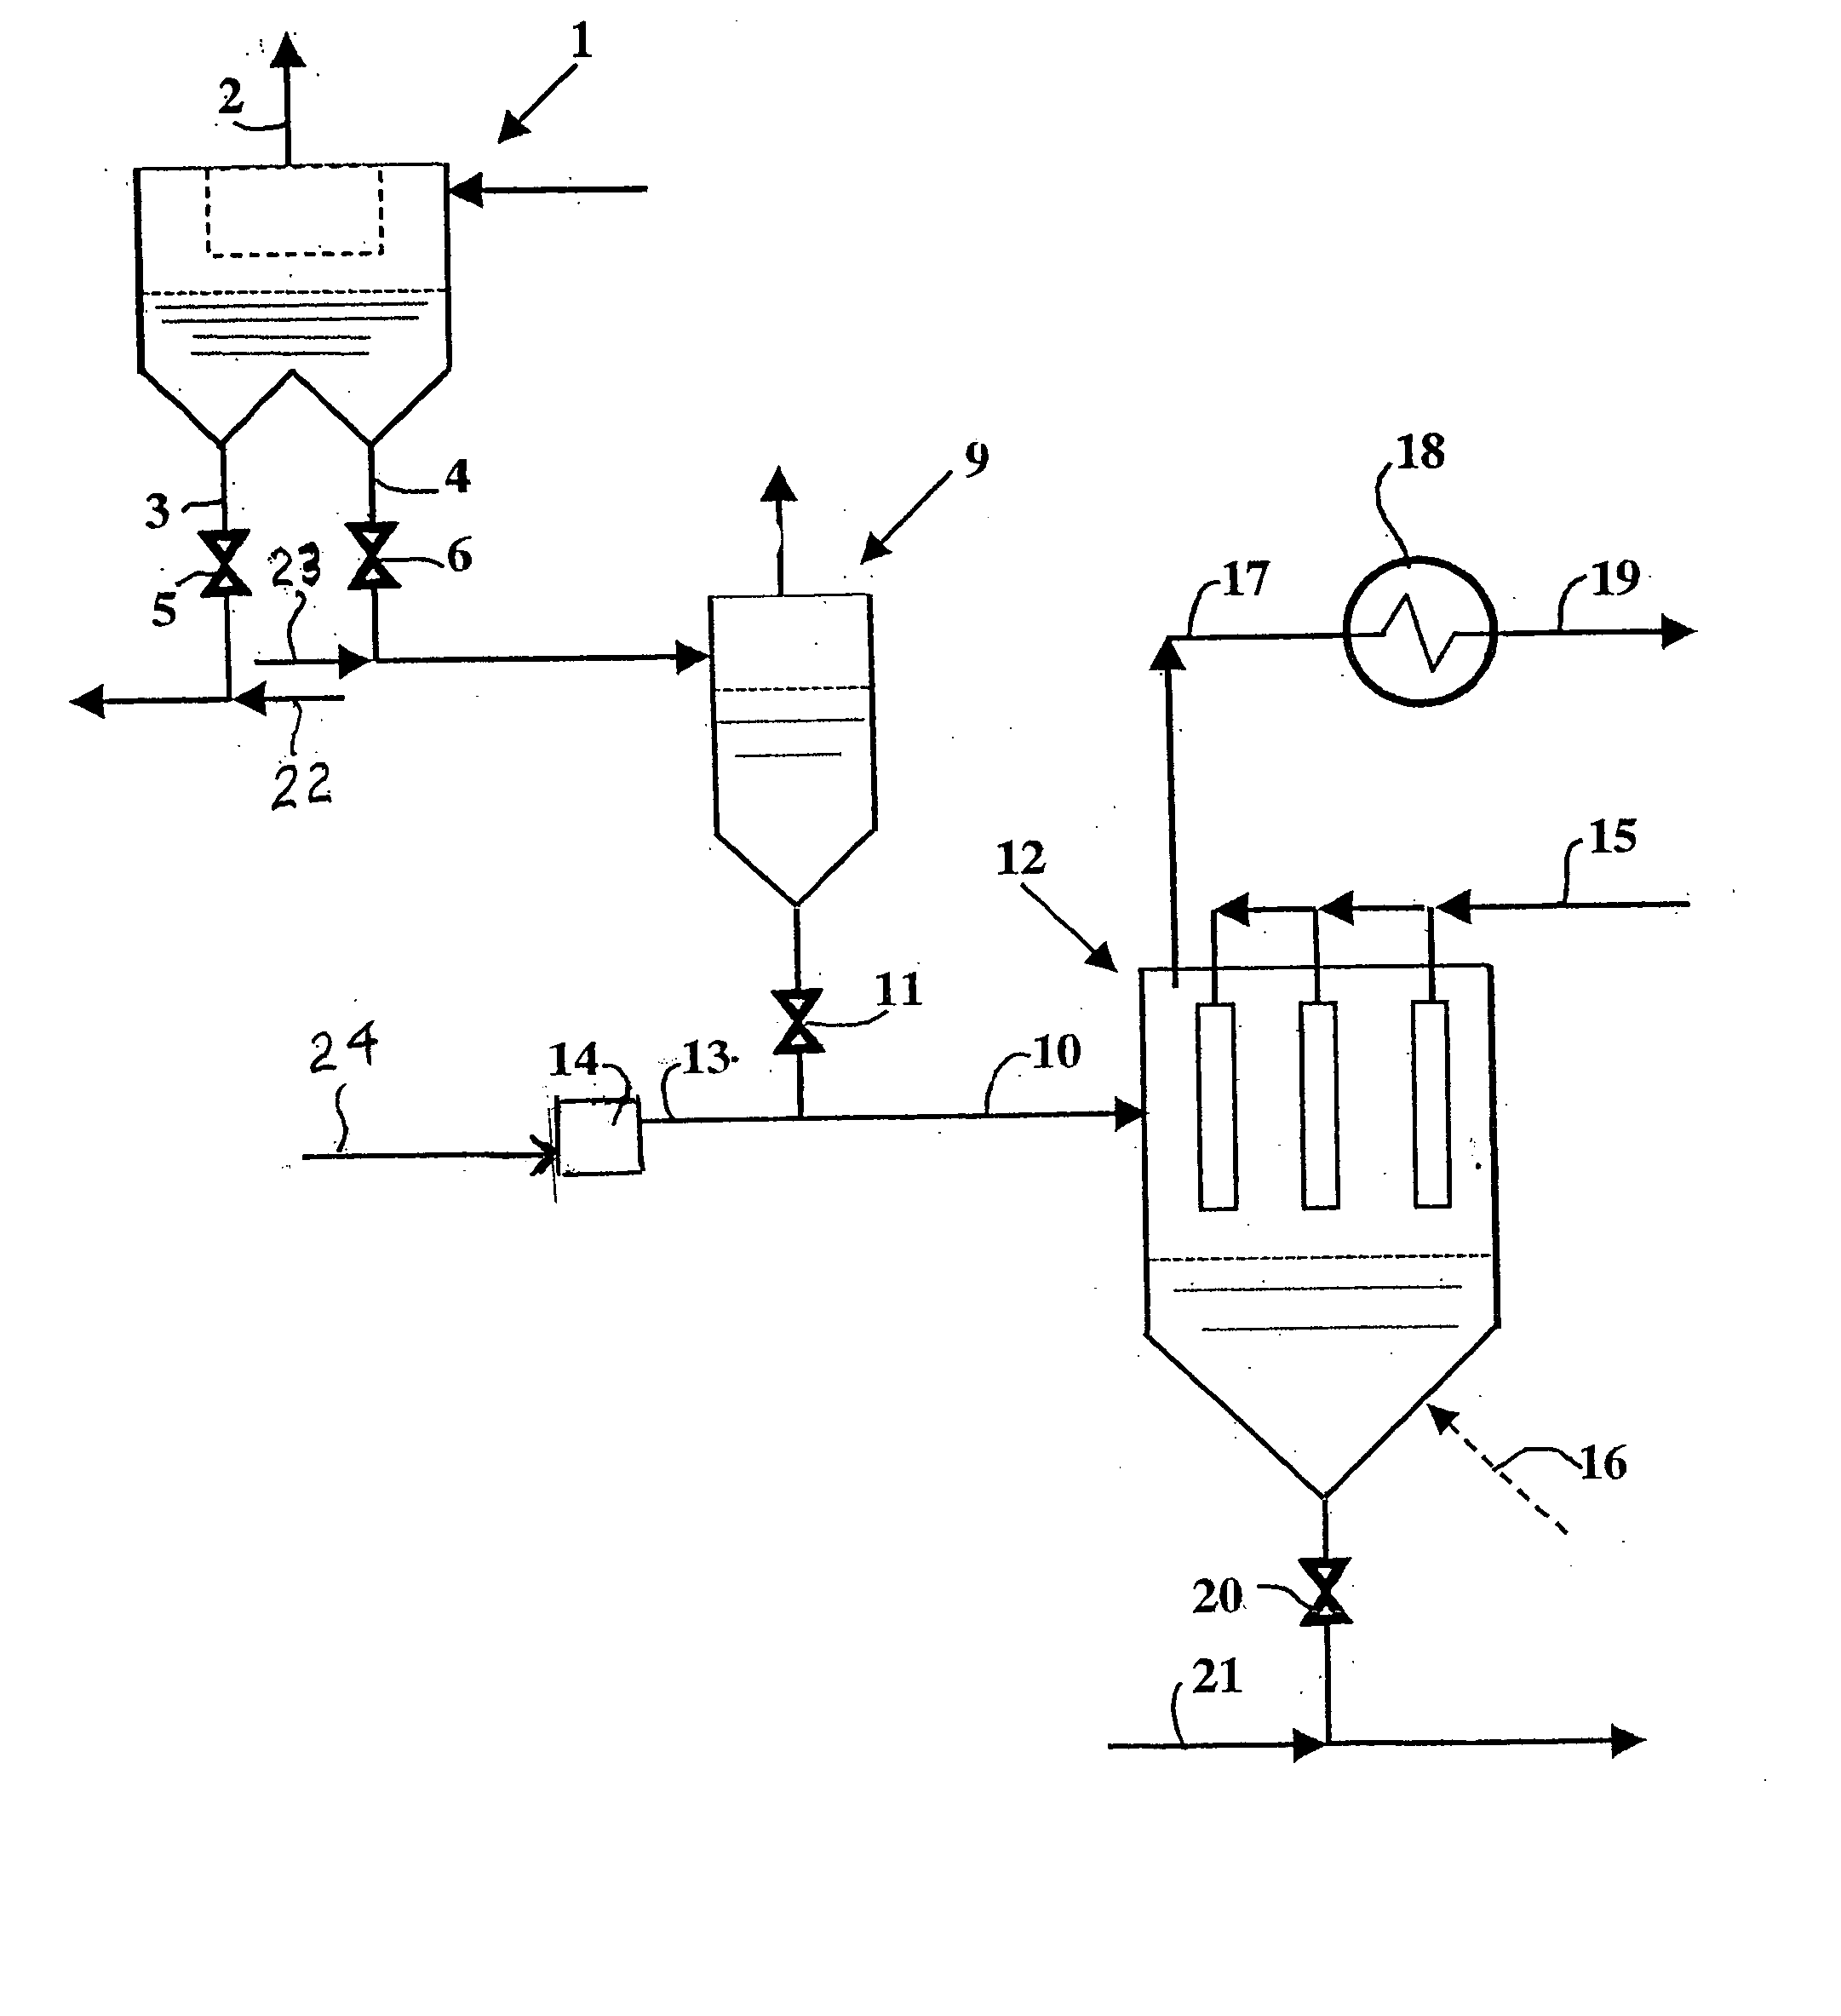 Process and device intended for regeneration of used absorbents from thermal generator fumes treatment